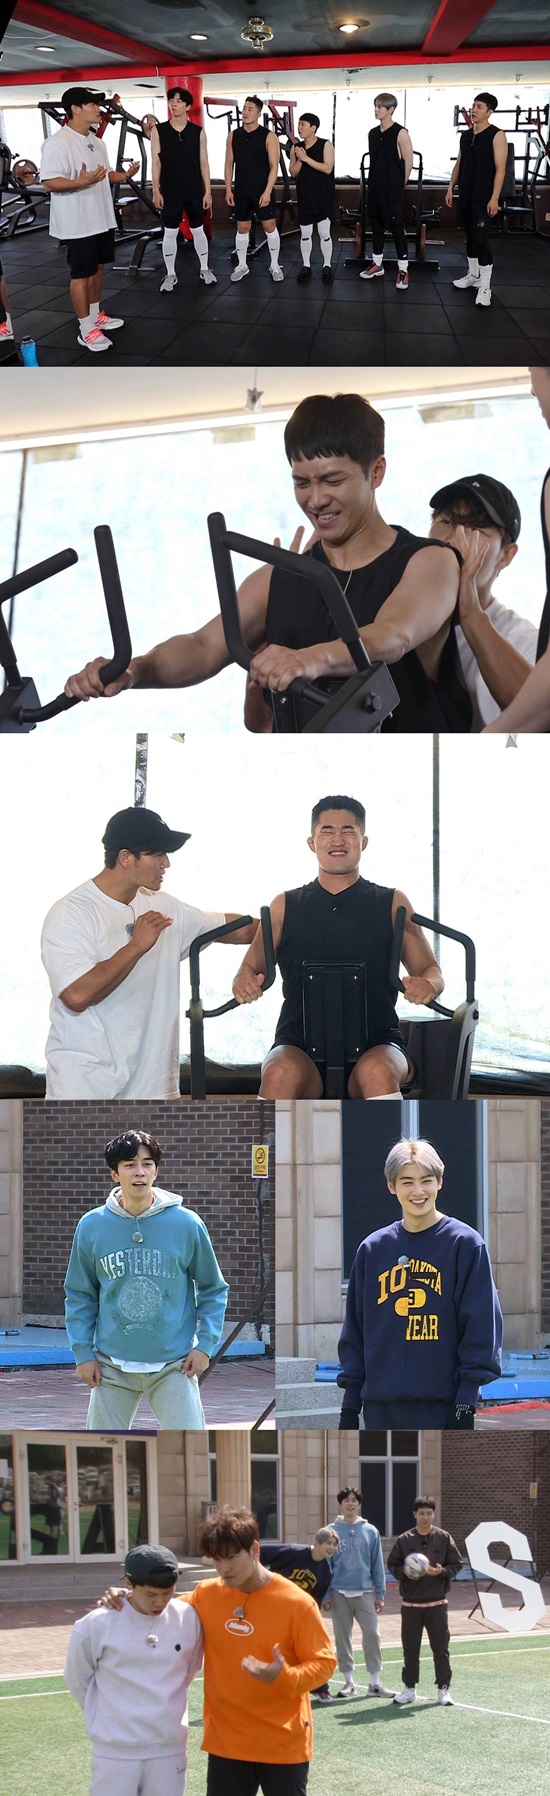 Kim Jong-kook presents Hardcore Holly eHealth Rutin in All The ButlersOn the 25th, SBS entertainment All The Butlers will feature a Hardcore Holly exercise course without an exit prepared by Master Kim Jong-kook.Kim Jong-kook, who gave delicious exercise tips to members from the last broadcast to bed, will guide members to eHealth, which is called a merchandising restaurant.Kim Jong-kook, who could not hide his excitement about the exercise, showed extreme exercises such as Squat 140kg carrying Kim Dong-Hyun.The members were surprised to see the muscles of Kim Jong-kook, who was stimulated and angry, and said, I feel like I have a full egg on my back.In addition, the members challenged the circit training of hell proposed by Kim Jong-kook.Kim Jong-kook, who has no break, is curious about who will survive safely on the Mata Taste course.On the other hand, Kim Jong-kooks vacation will be followed by Jokgu confrontation with members and unidentified UCLA Jokgu team.The confident members were embarrassed by the unexpected performance of the opponent team.In the end, Kim Jong-kook, who was burned by the victory, was dragged out of the roar and laughed at the division inside the team.In particular, Yang had a time with Kim Jong-kook and received intensive education.All The Butlers will be broadcast at 6:25 pm on the 25th, where the eHealth vacation of hell with the hiccups will be held in the All The ButlersPhoto = SBS